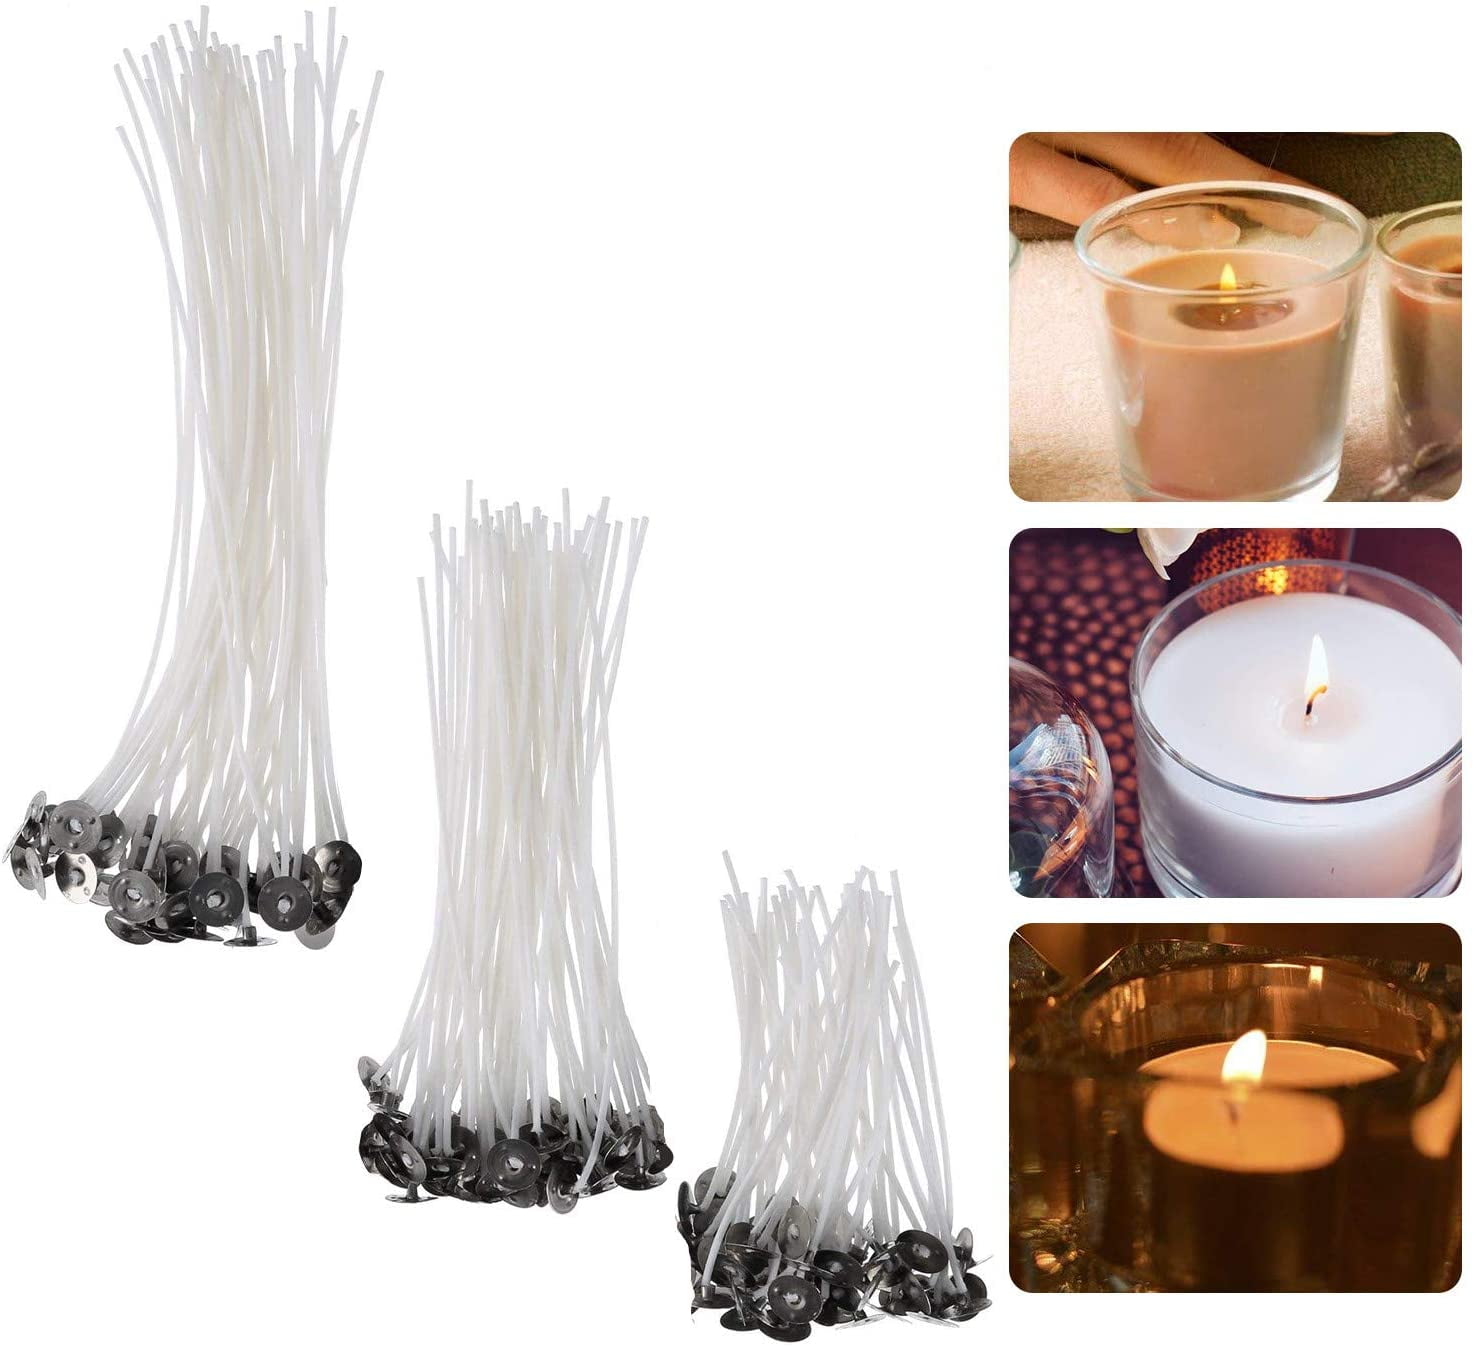 30 Pre Waxed  Wicks 200mm Lenght For candle making with sustainers. 